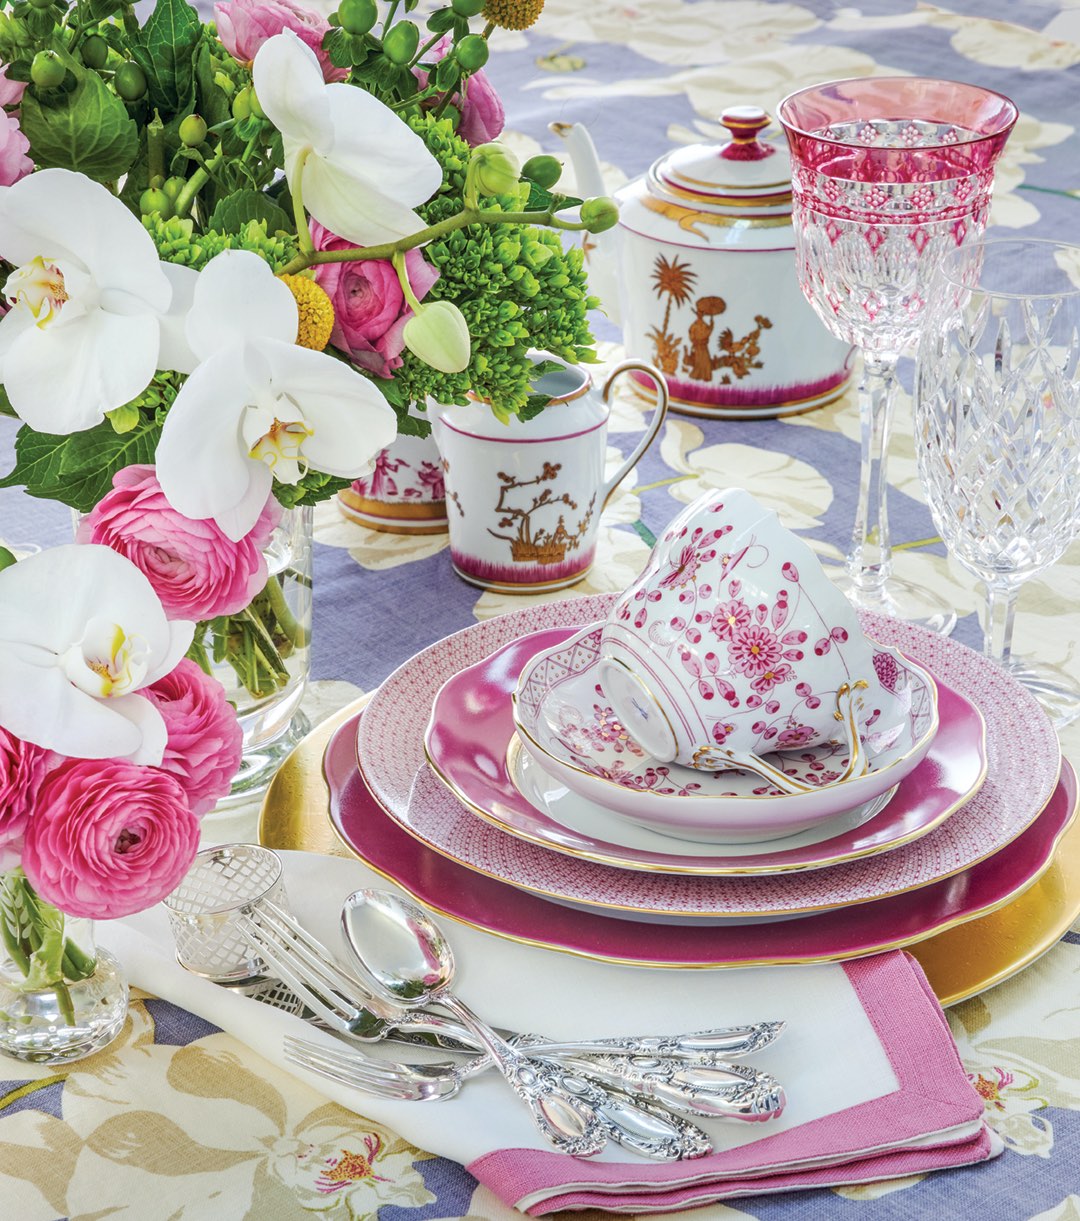 Tablescape with vivid pinks are balanced by crisp whites and cool blues